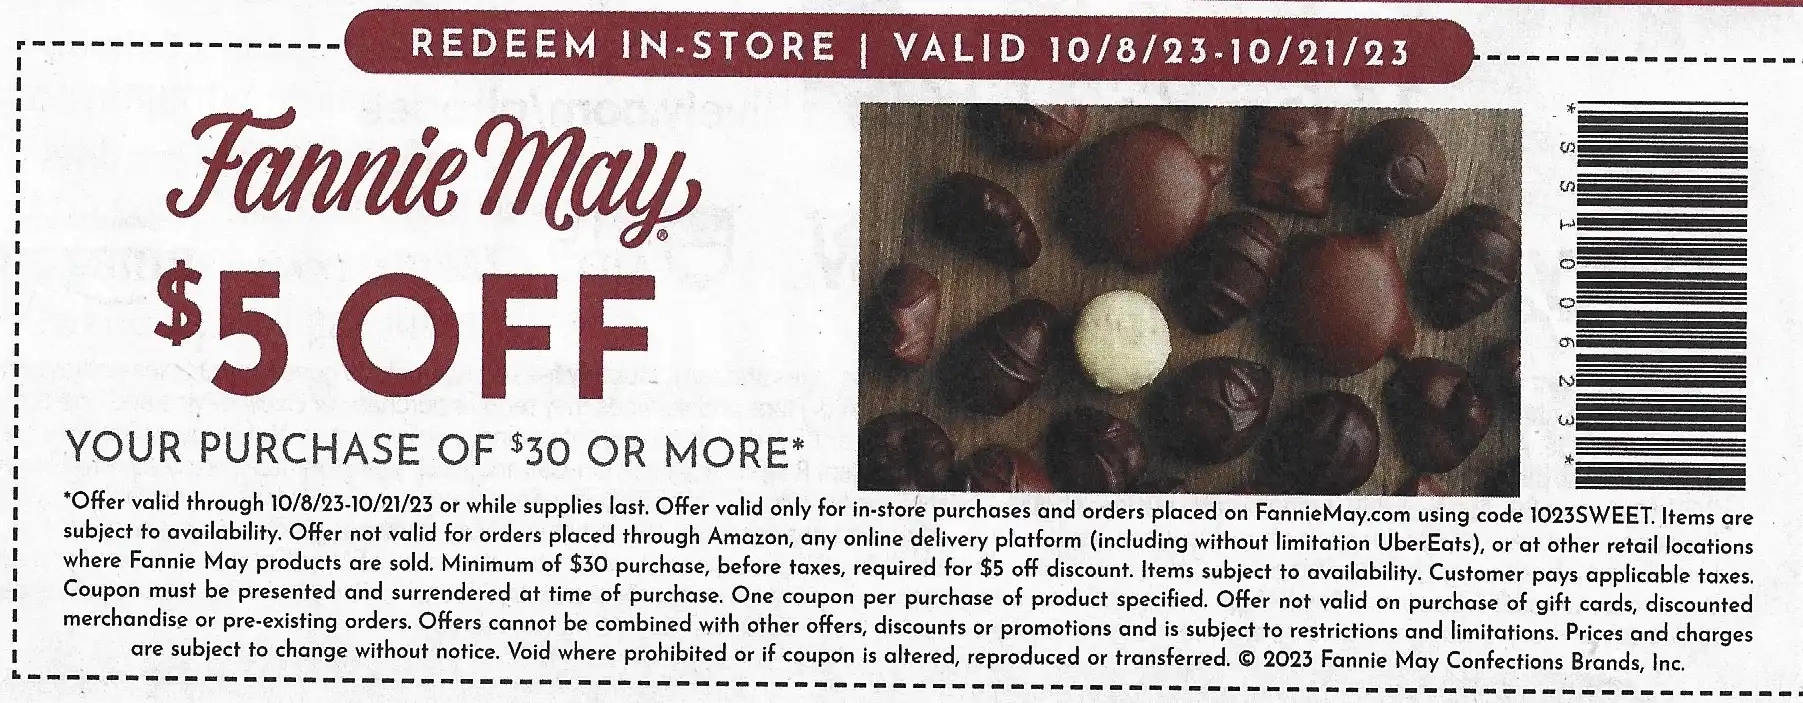 Fannie May: $5 Off Purchase of $30 or More - Expires 10/21/2023